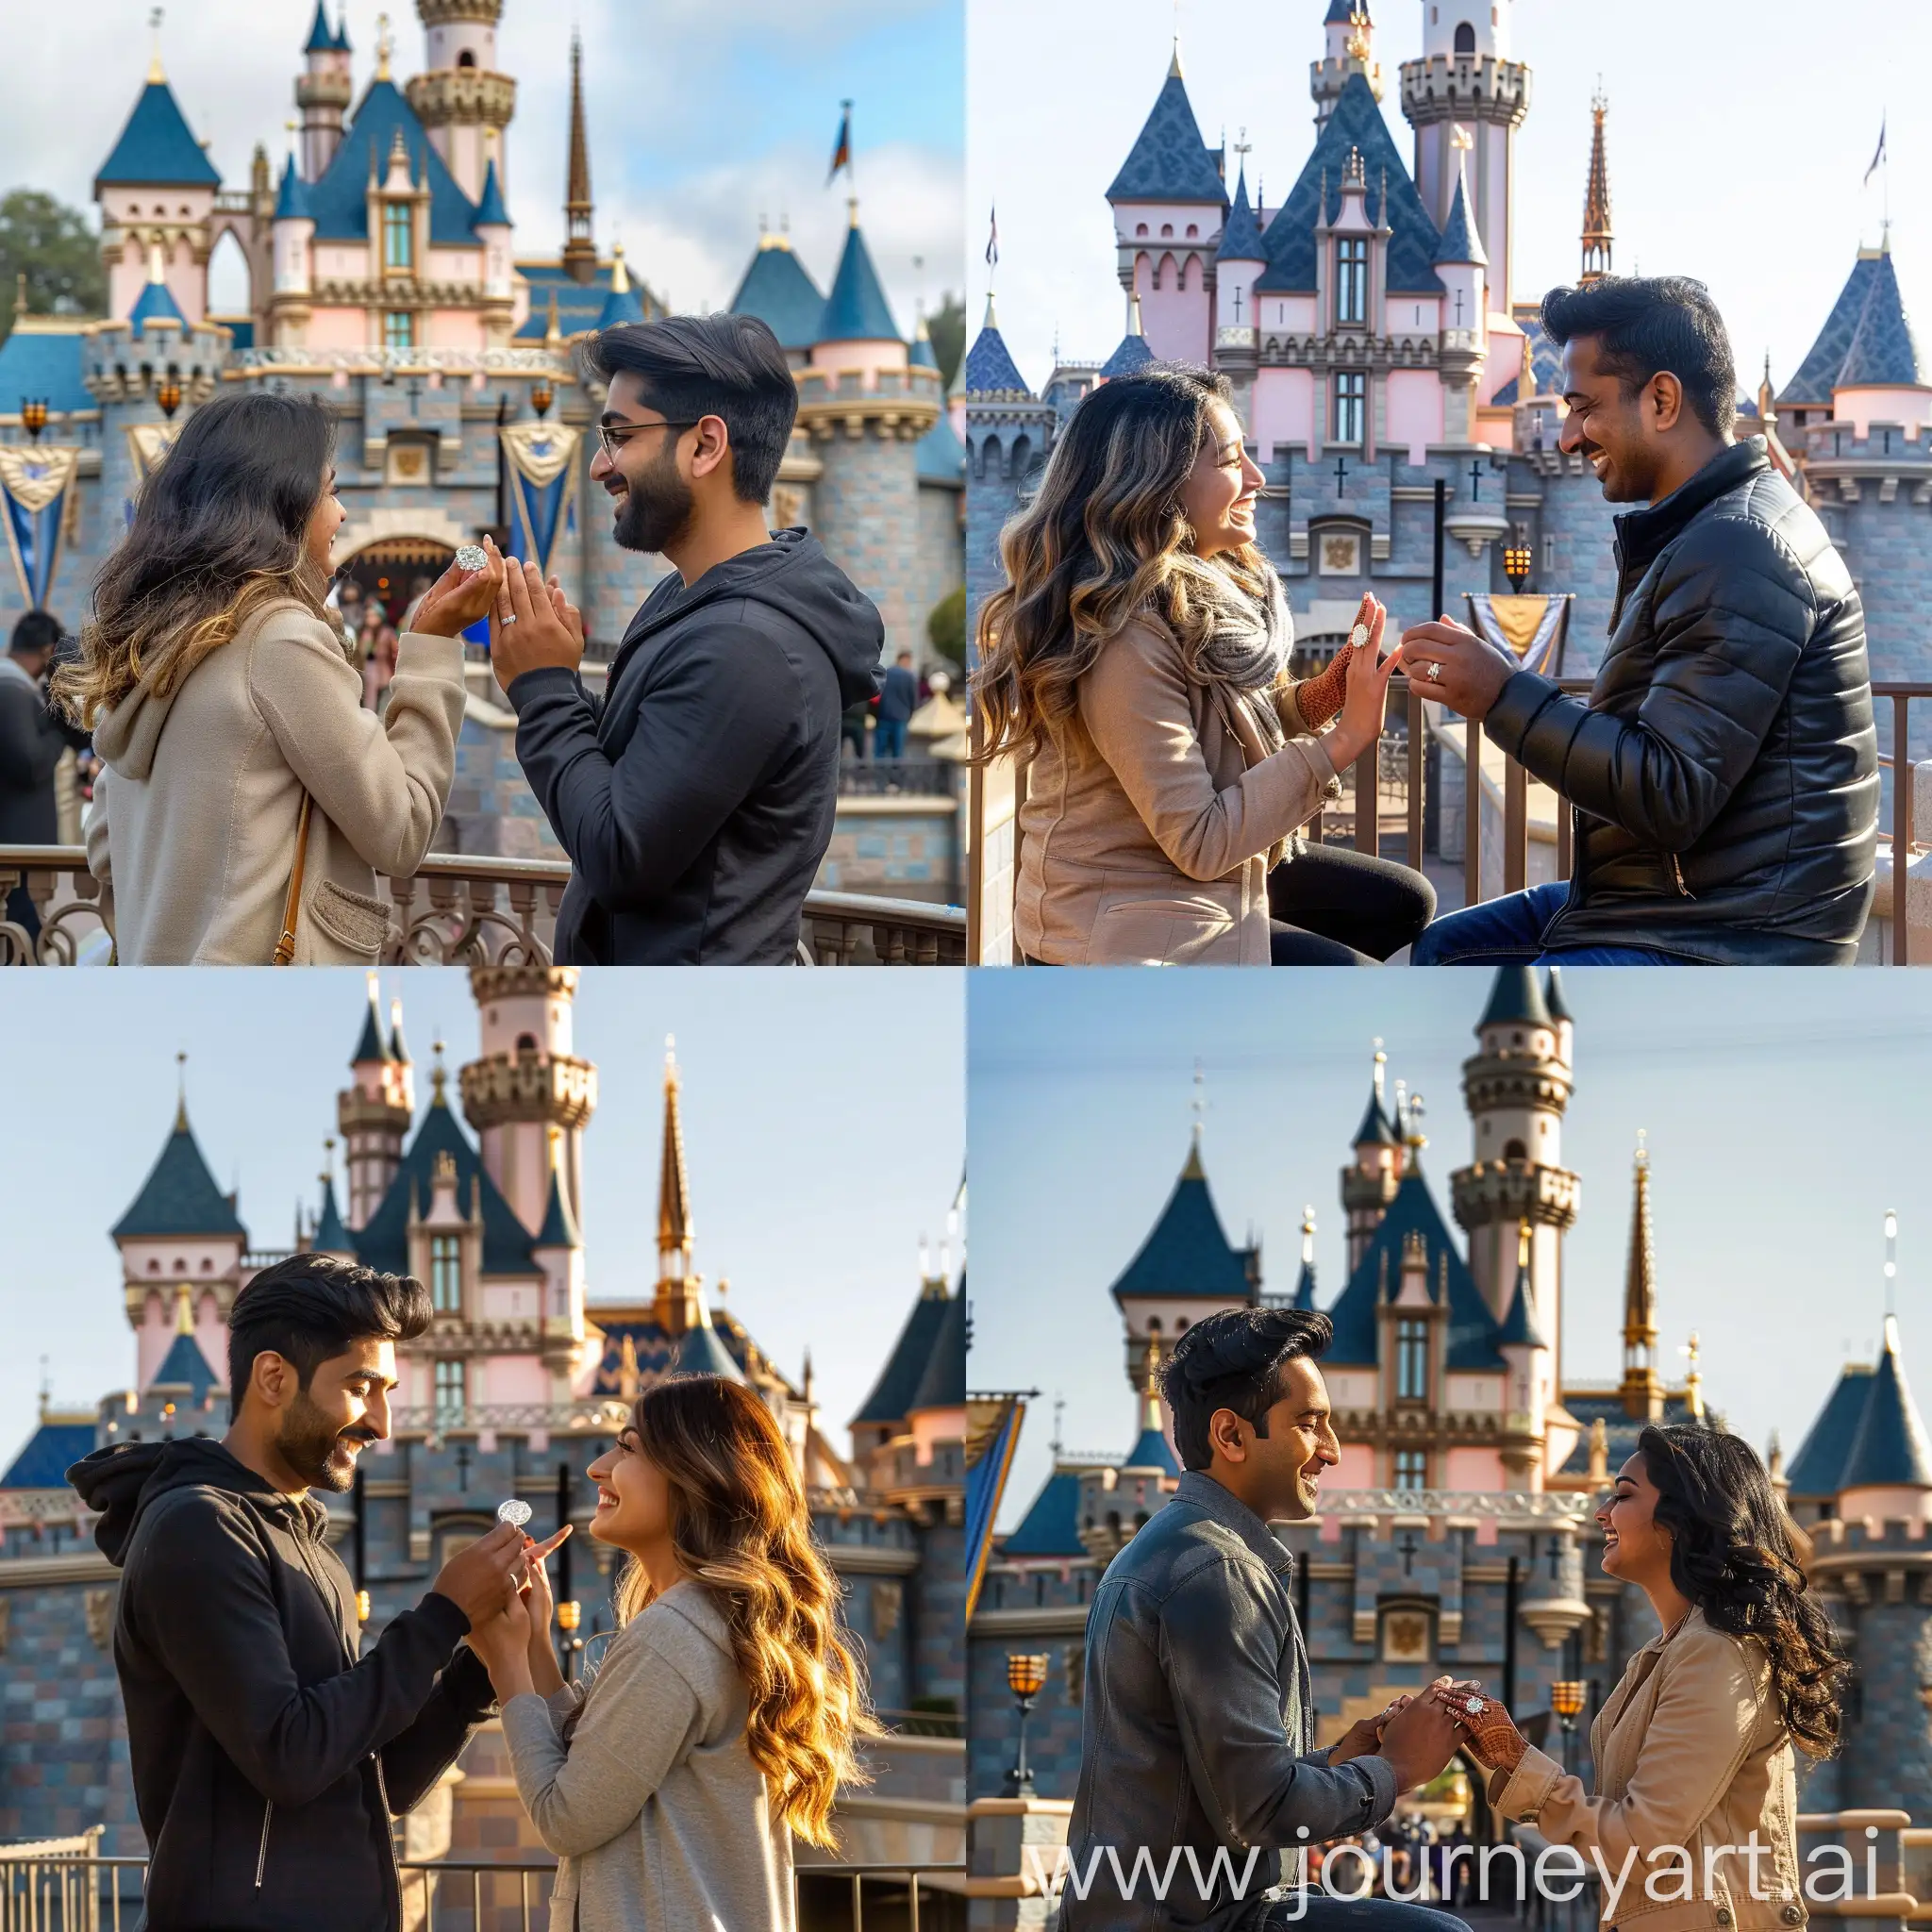 Romantic-Indian-Marriage-Proposal-at-Disneyland-Castle-with-Shiny-Diamond-Ring